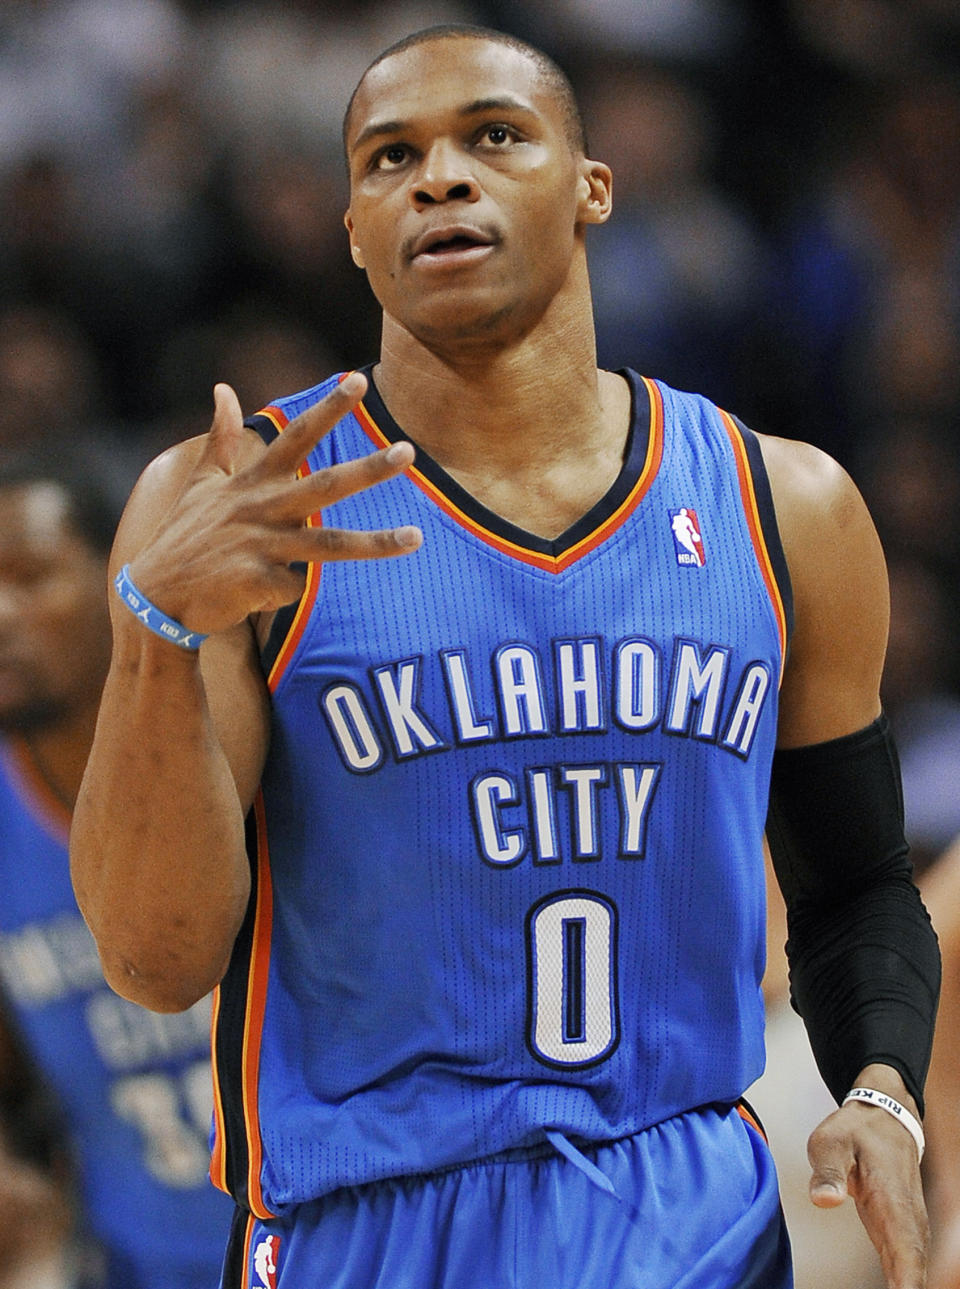 FILE - In this Dec. 21, 2013, file photo,, Oklahoma City Thunder guard Russell Westbrook celebrates a 3-point basket during the first half of an NBA basketball game against the San Antonio Spurs in San Antonio. Yes, the Thunder are rolling without him, but Westbrook, when healthy, is one of the most dynamic players in the NBA. He has been out since late December after having surgery on his right knee. (AP Photo/Darren Abate, File)